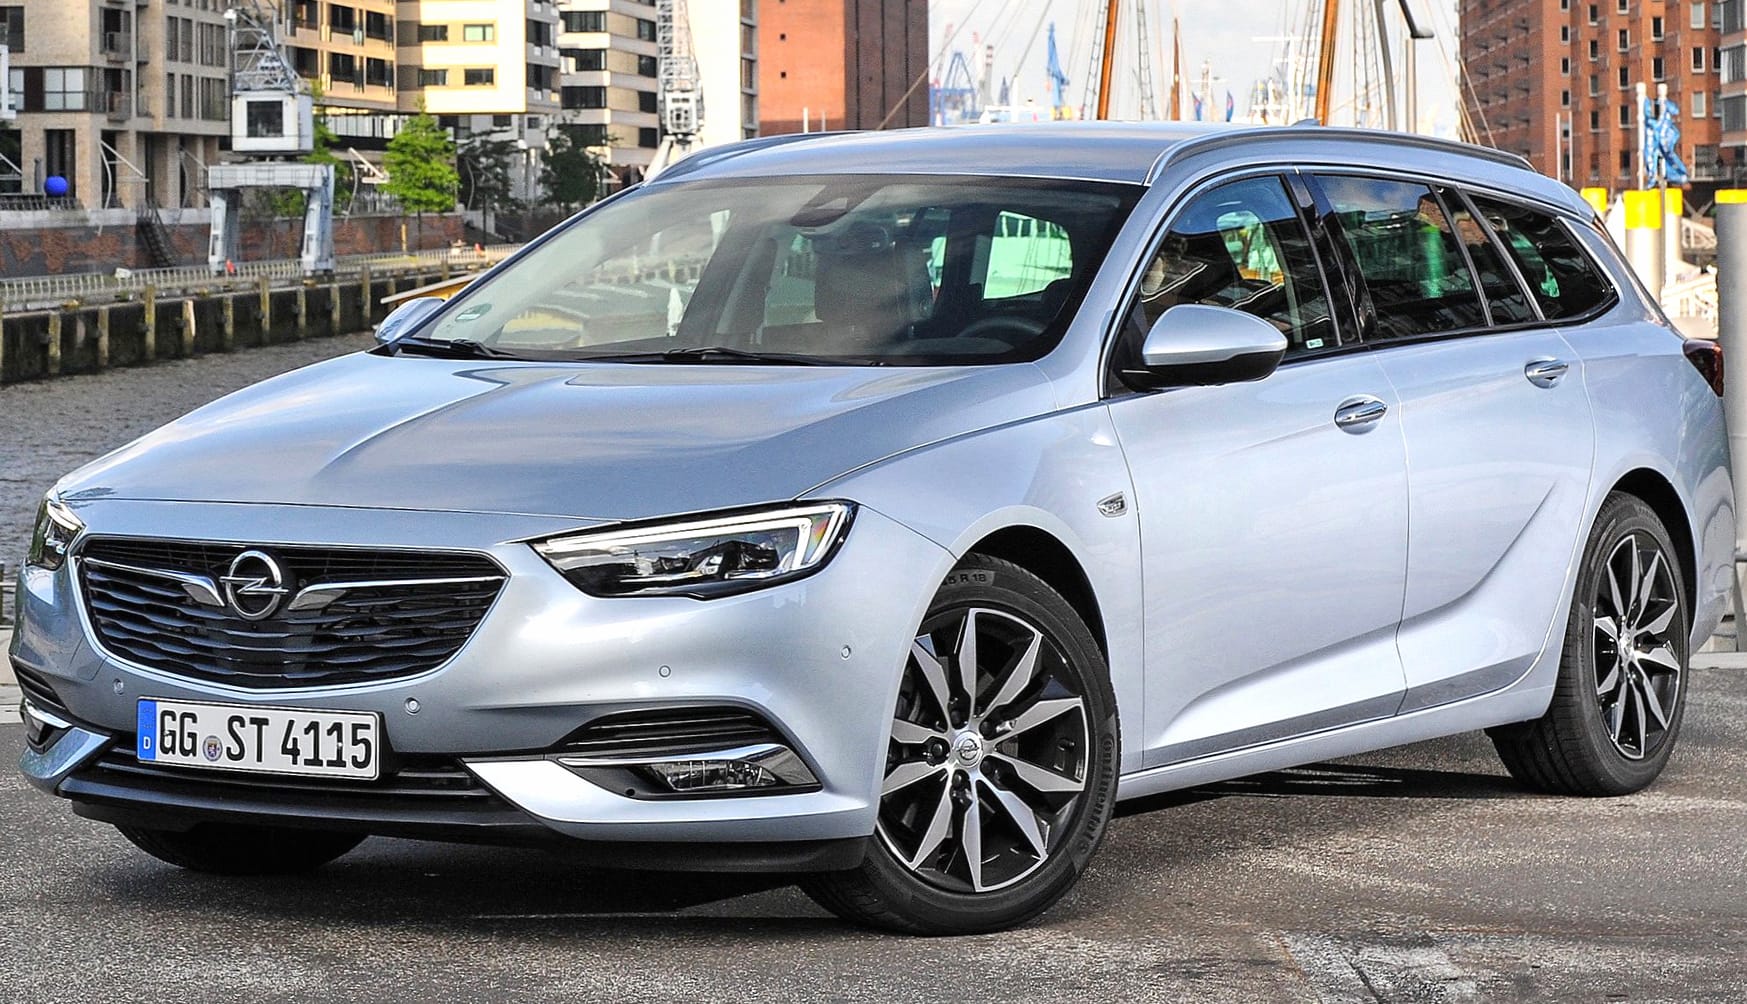 Opel Insignia Turbo D Sports Tourer wallpapers HD quality